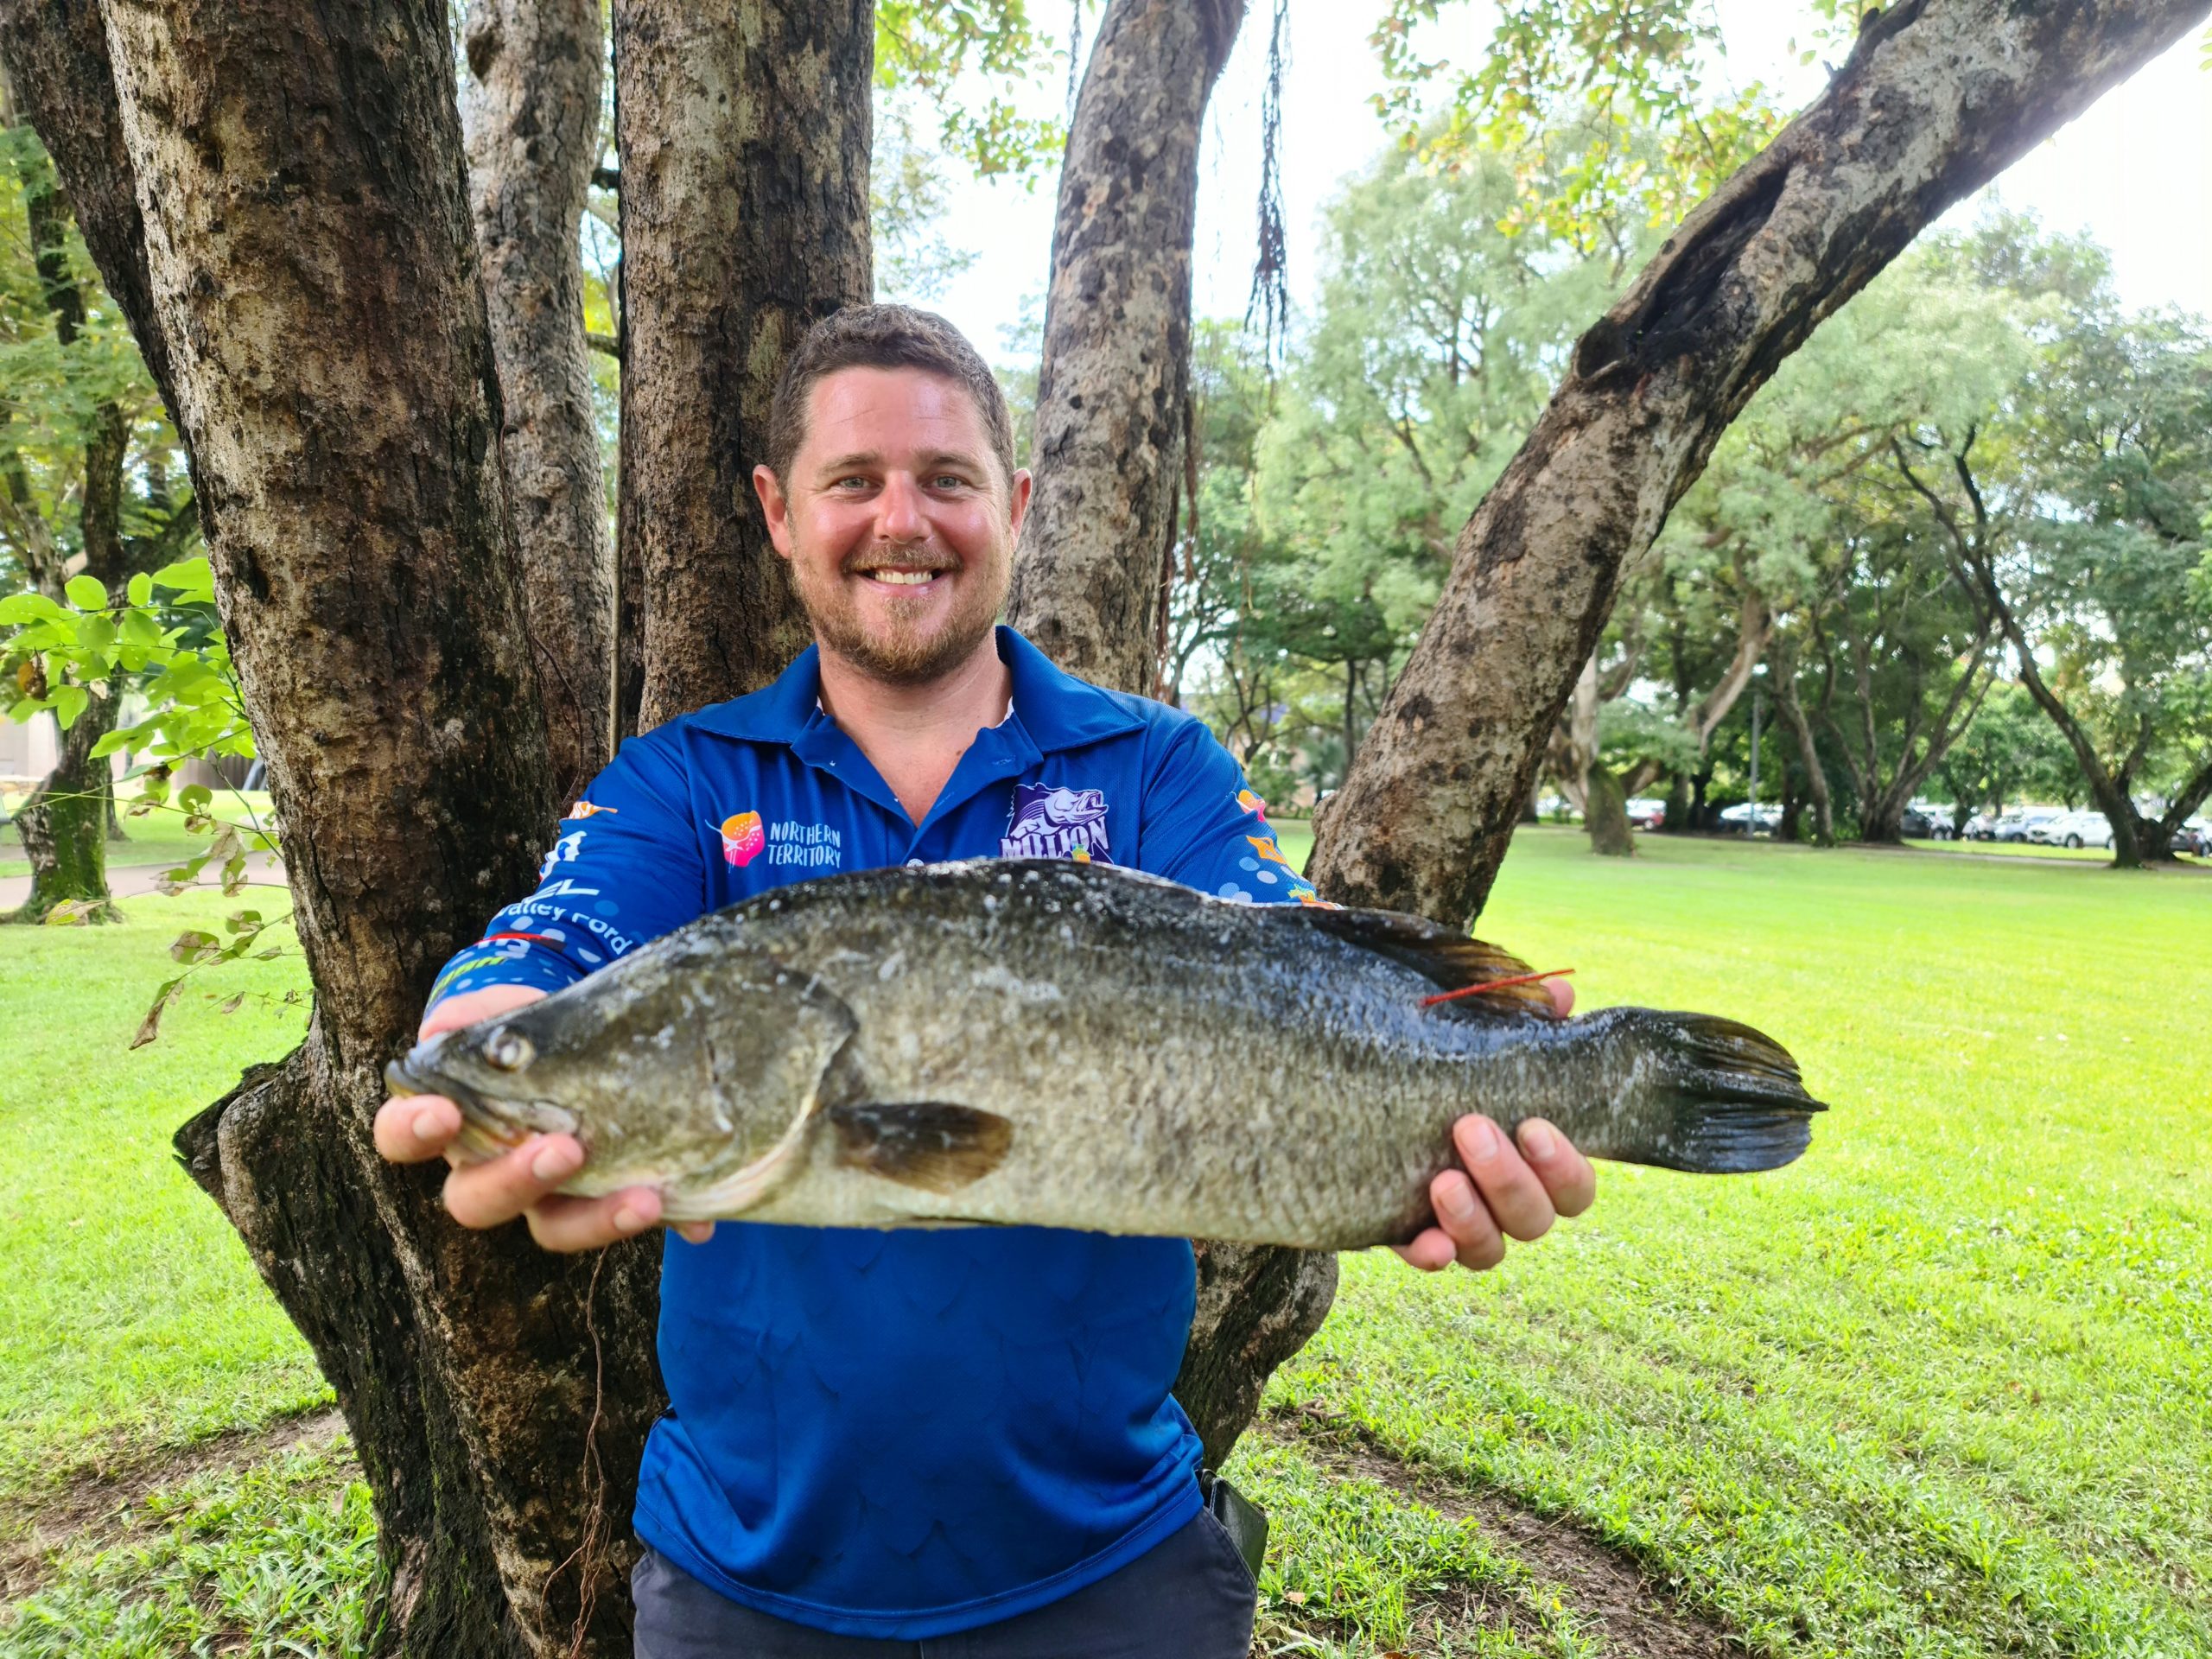 Queenslander goes home $10,000 richer after bagging a barra in the Territory